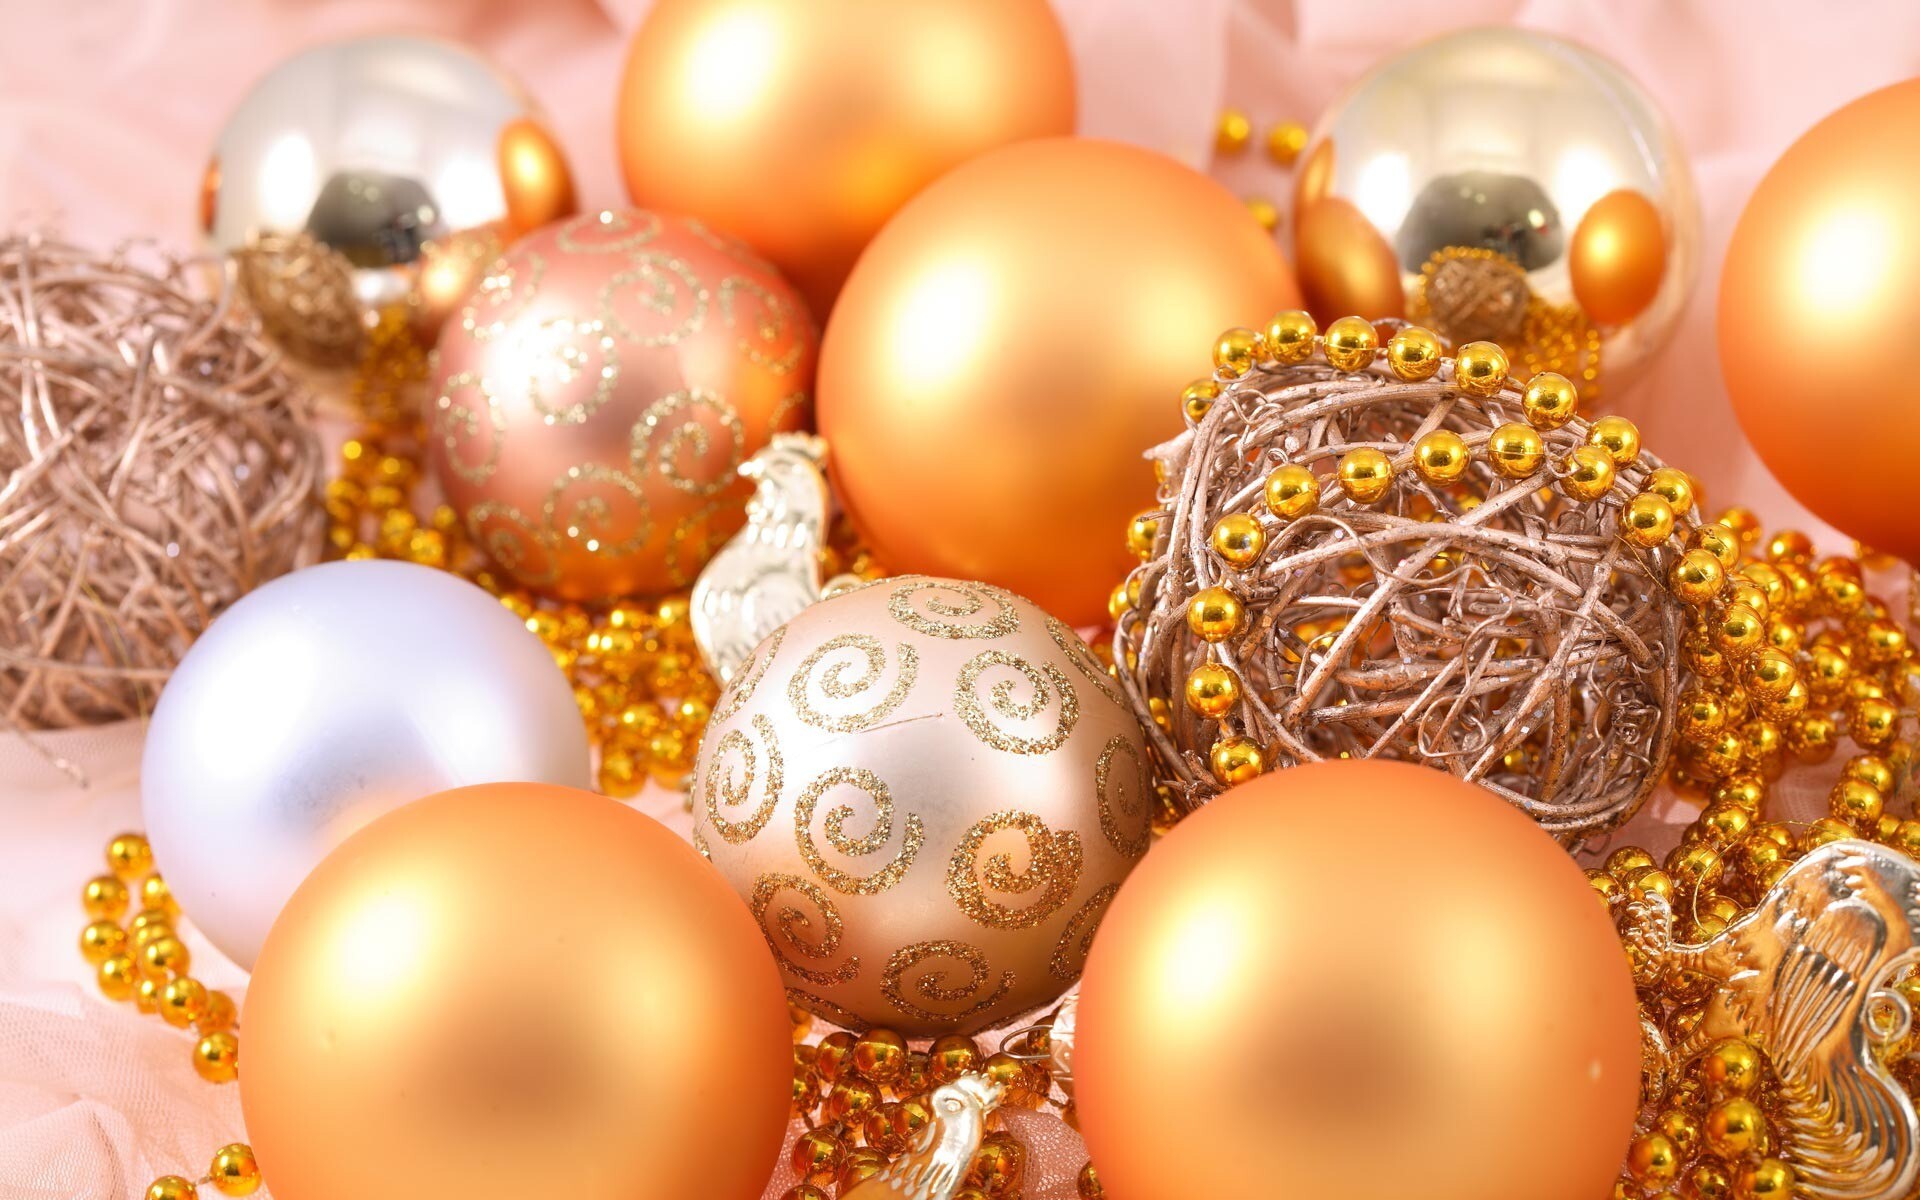 Christmas Ornament: Family collections often contain a combination of commercially produced ornaments and decorations created by family members. 1920x1200 HD Wallpaper.